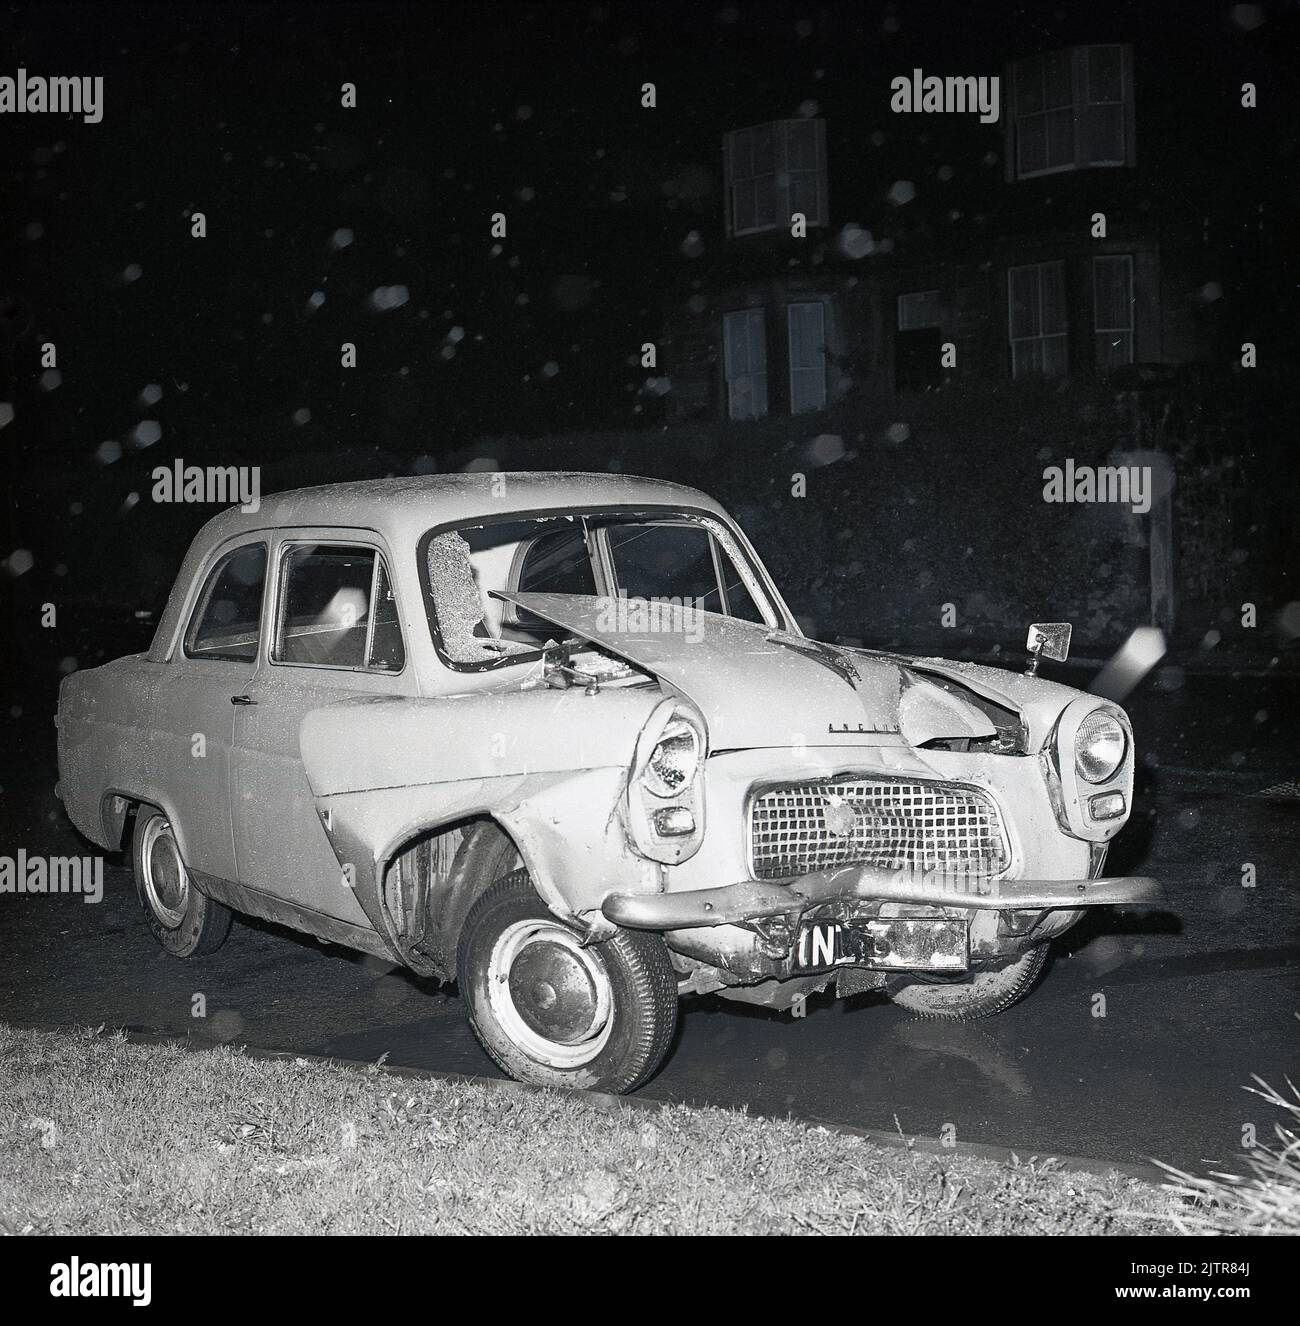 1960s, historical, night-time, a view of a crashed Ford Anglia 100E of the era. Stock Photo